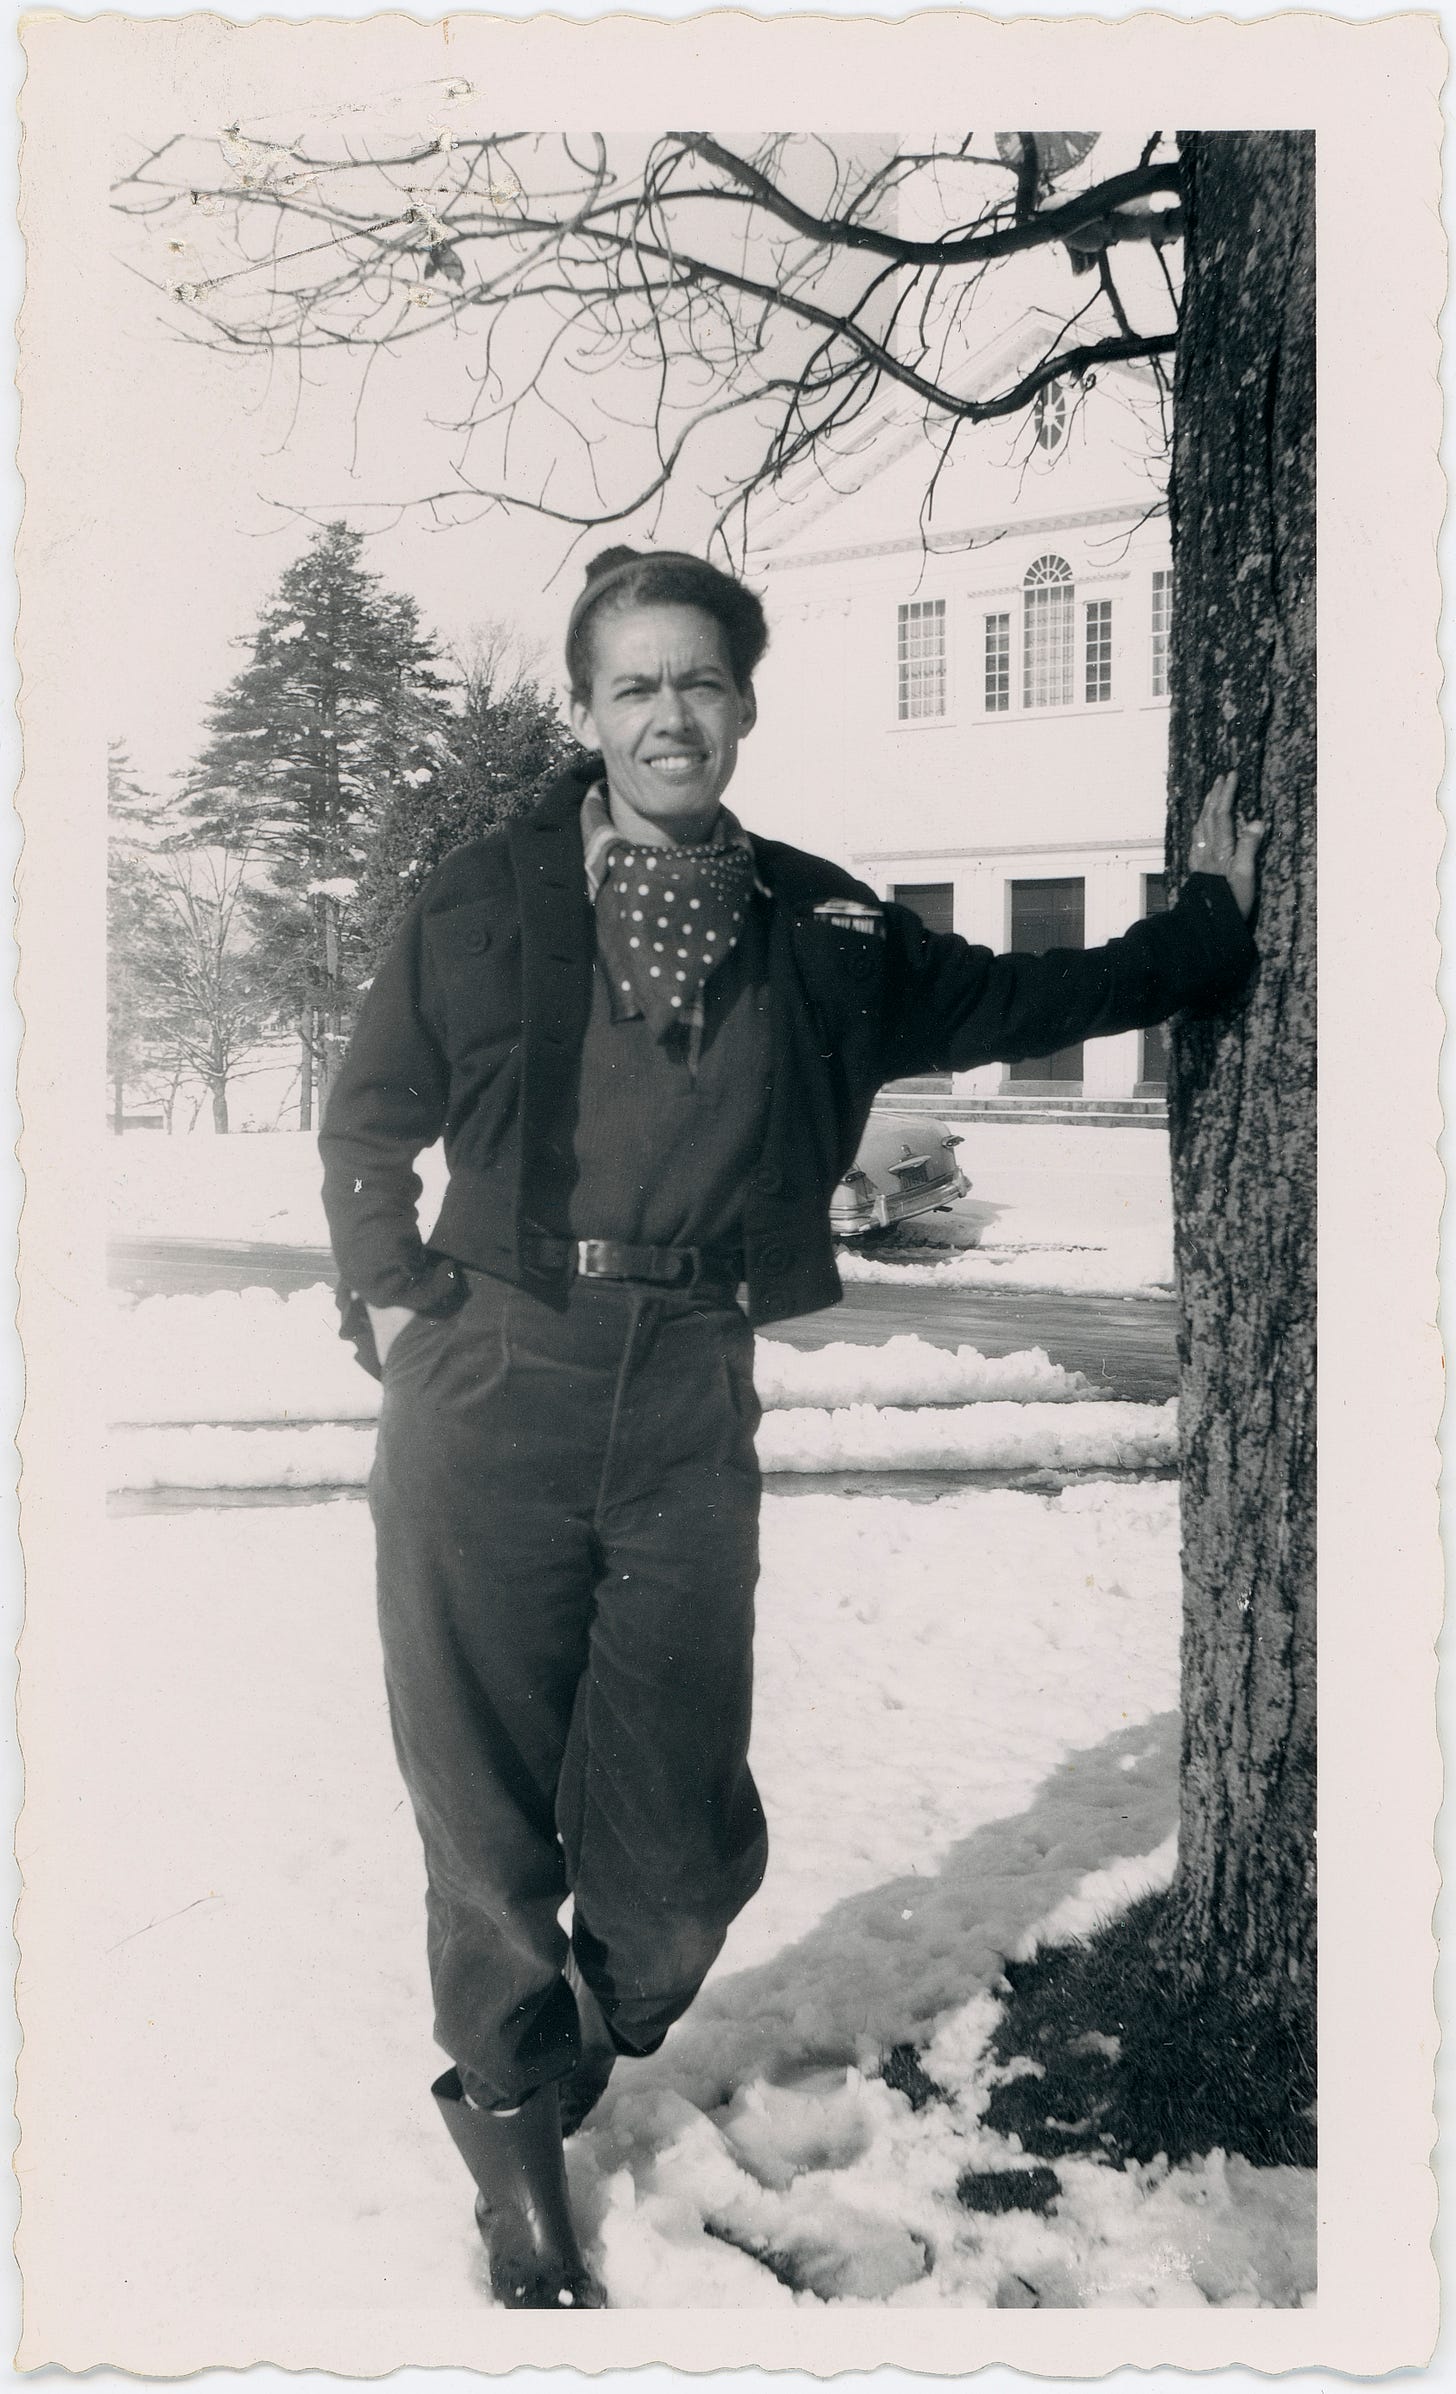 Pauli Murray wearing androgynous clothing standing next to a tree outdoors in winter 1955